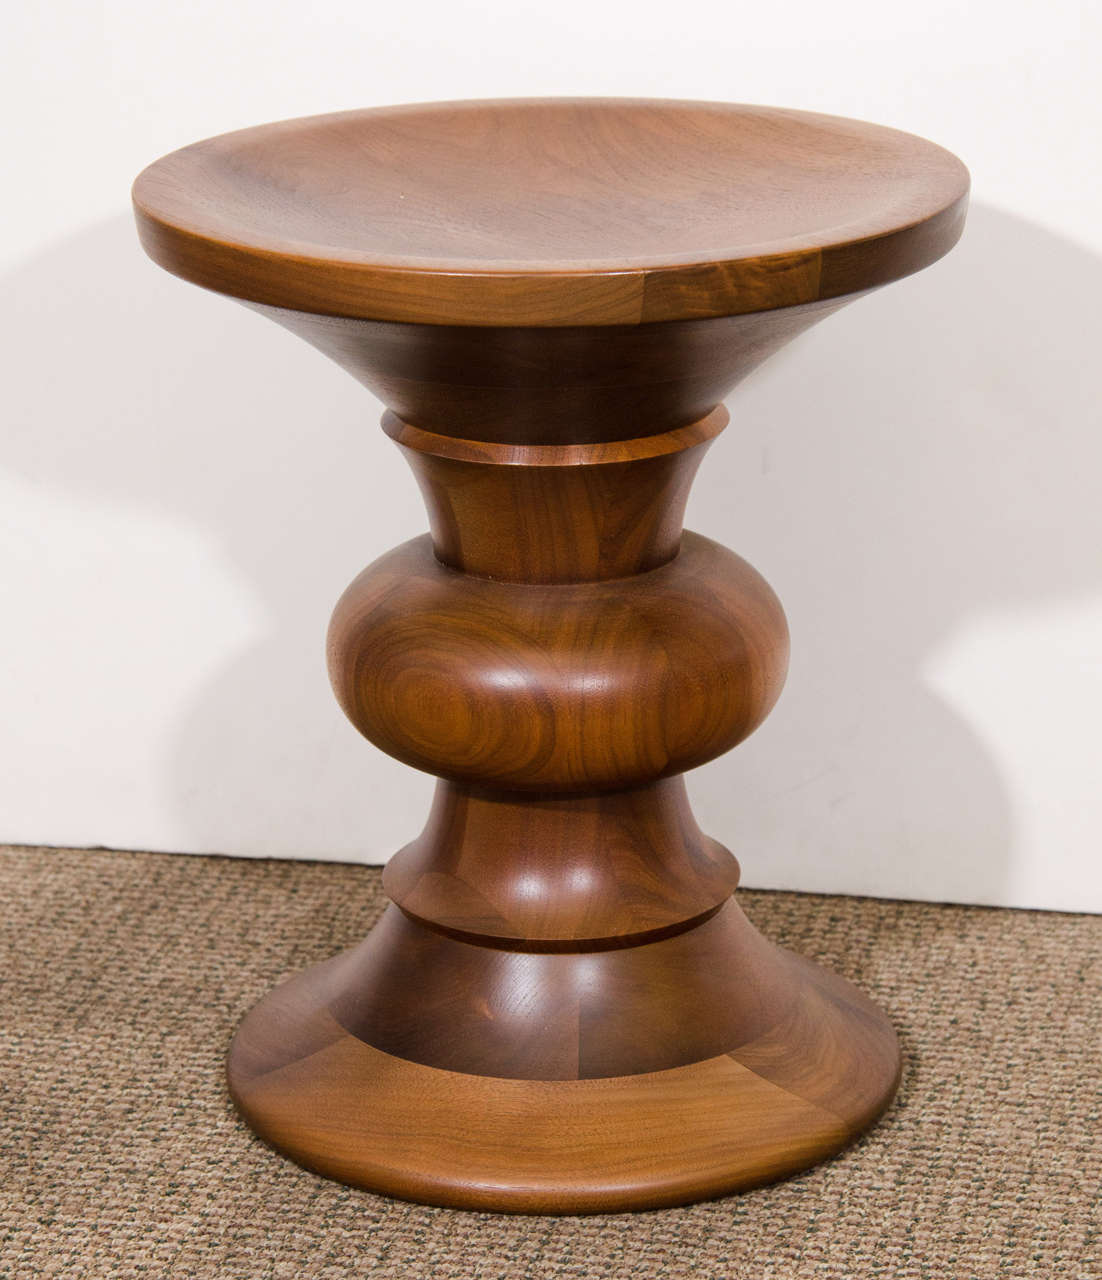 A vintage sculptural turned wood stool designed by Charles and Ray Eames for the Time-Life building in New York. Can also be used for a table.

Good vintage condition with age appropriate wear to seat area.